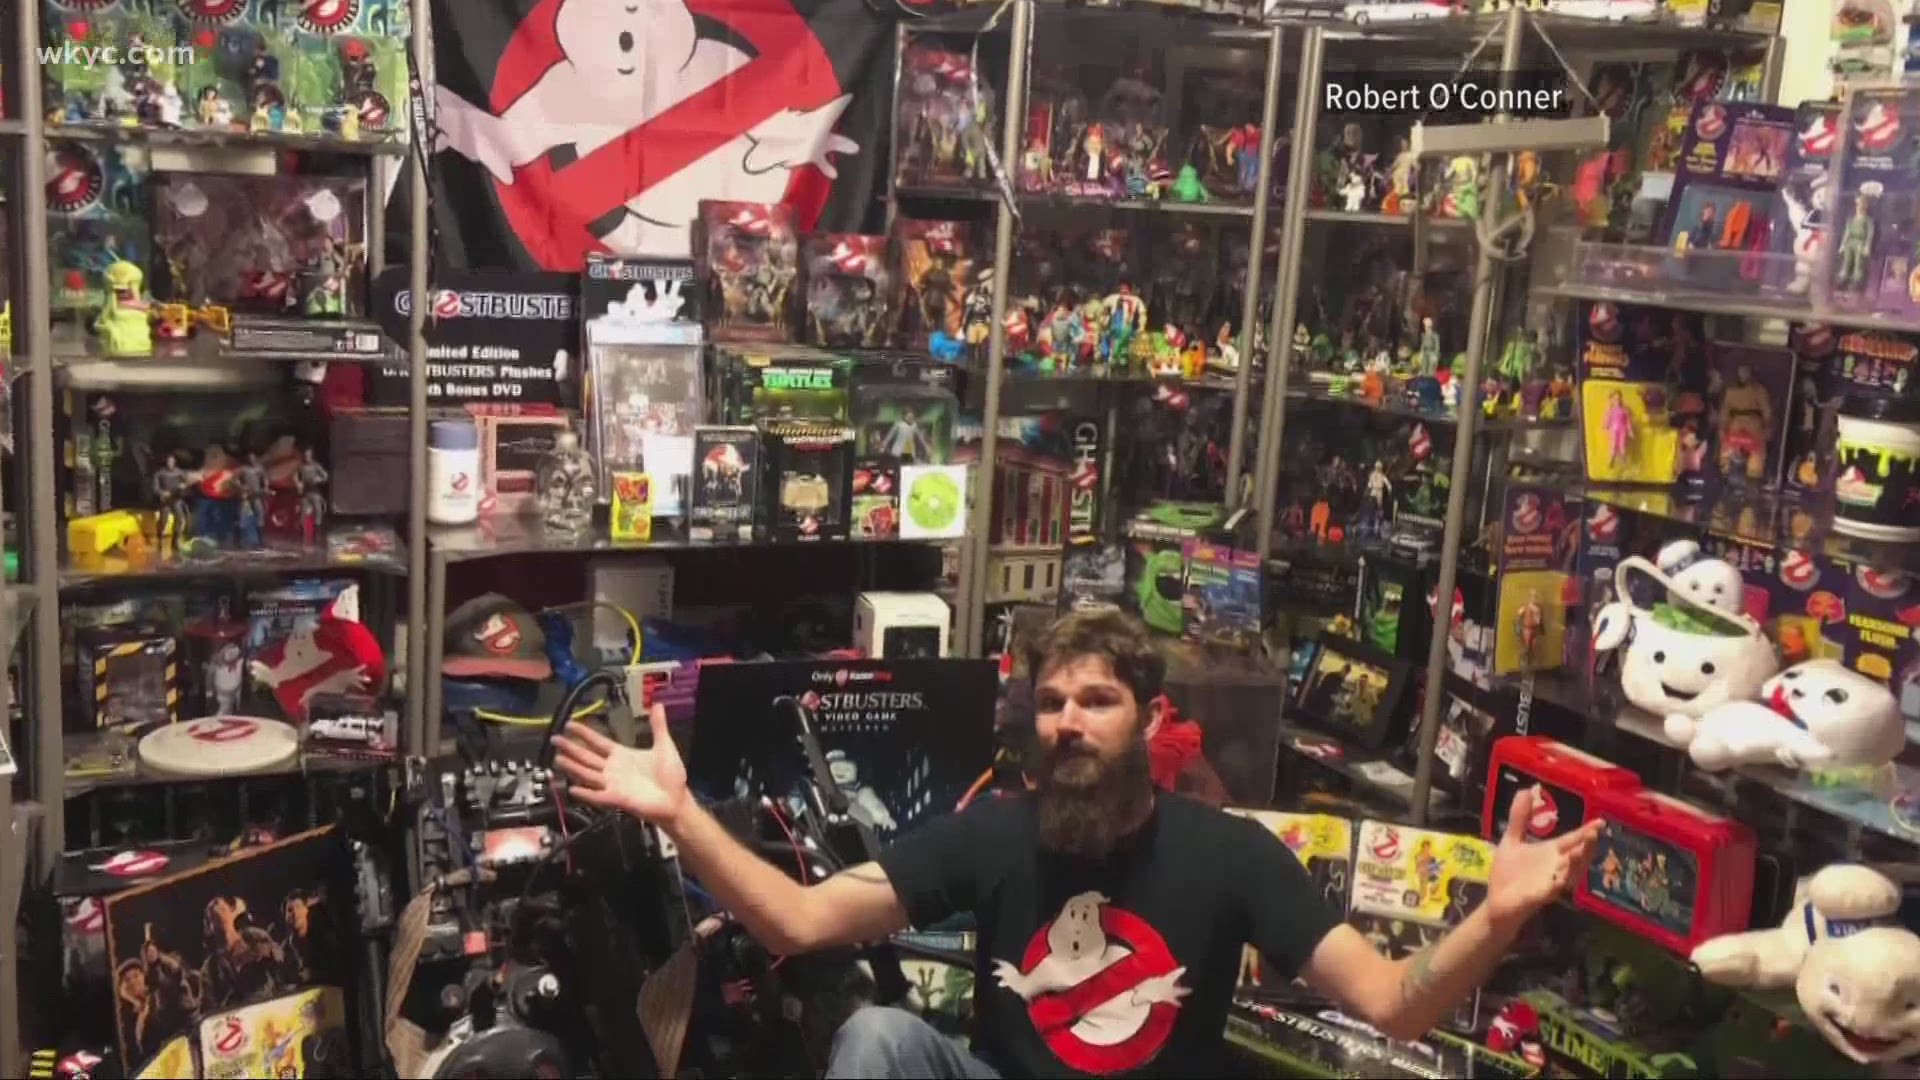 There's 'something strange in the neighborhood.' Robert O'Connor showed us his awesome 'Ghostbusters' collection!